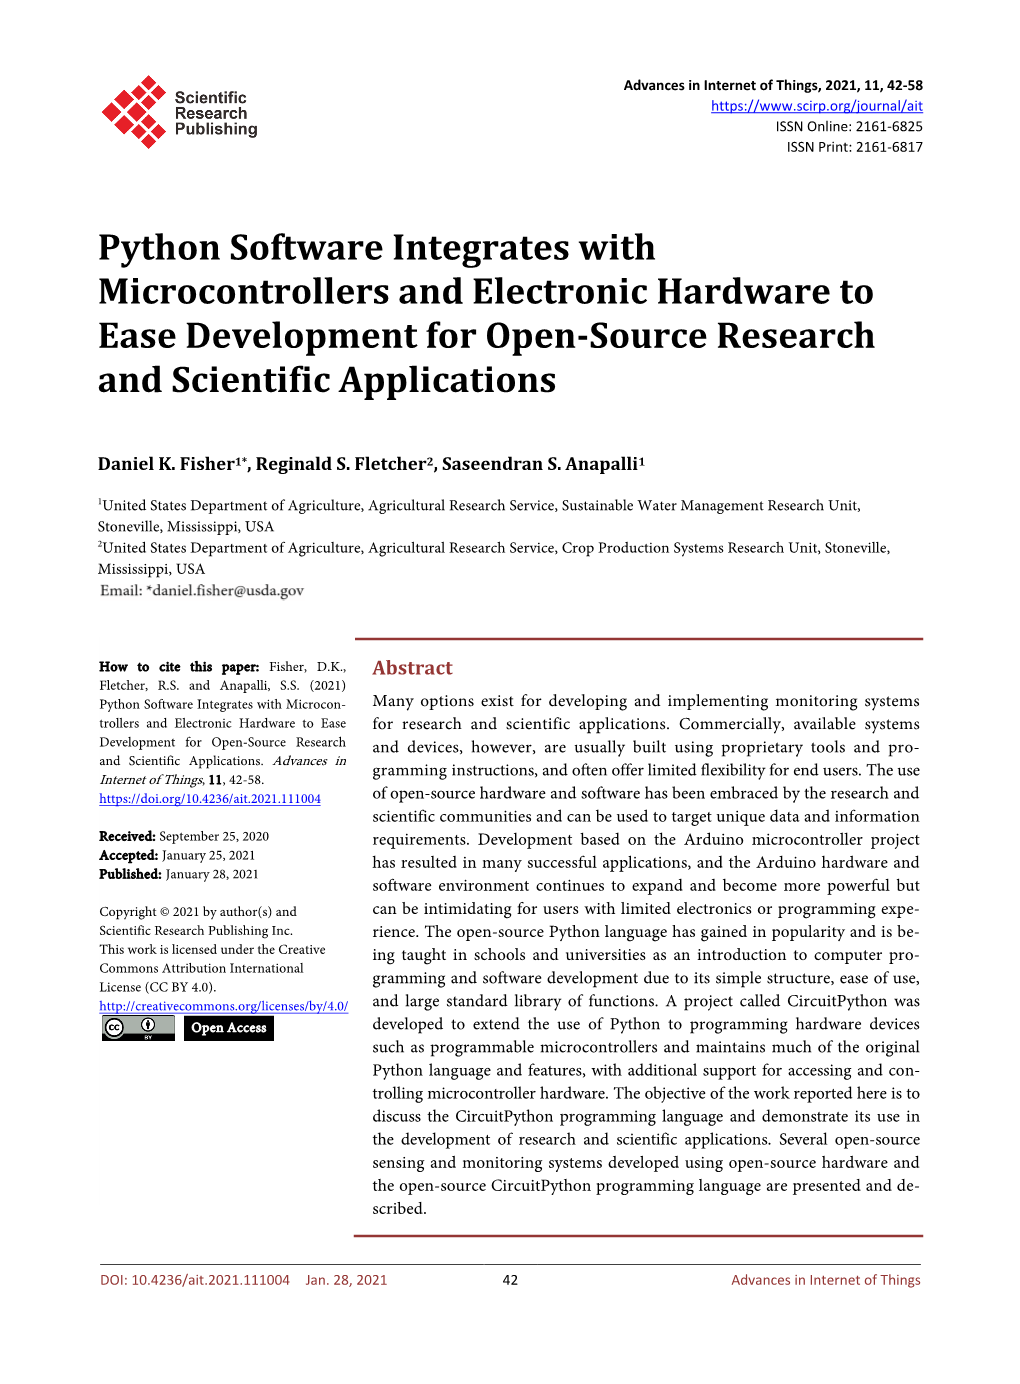 Python Software Integrates with Microcontrollers and Electronic Hardware to Ease Development for Open-Source Research and Scientific Applications